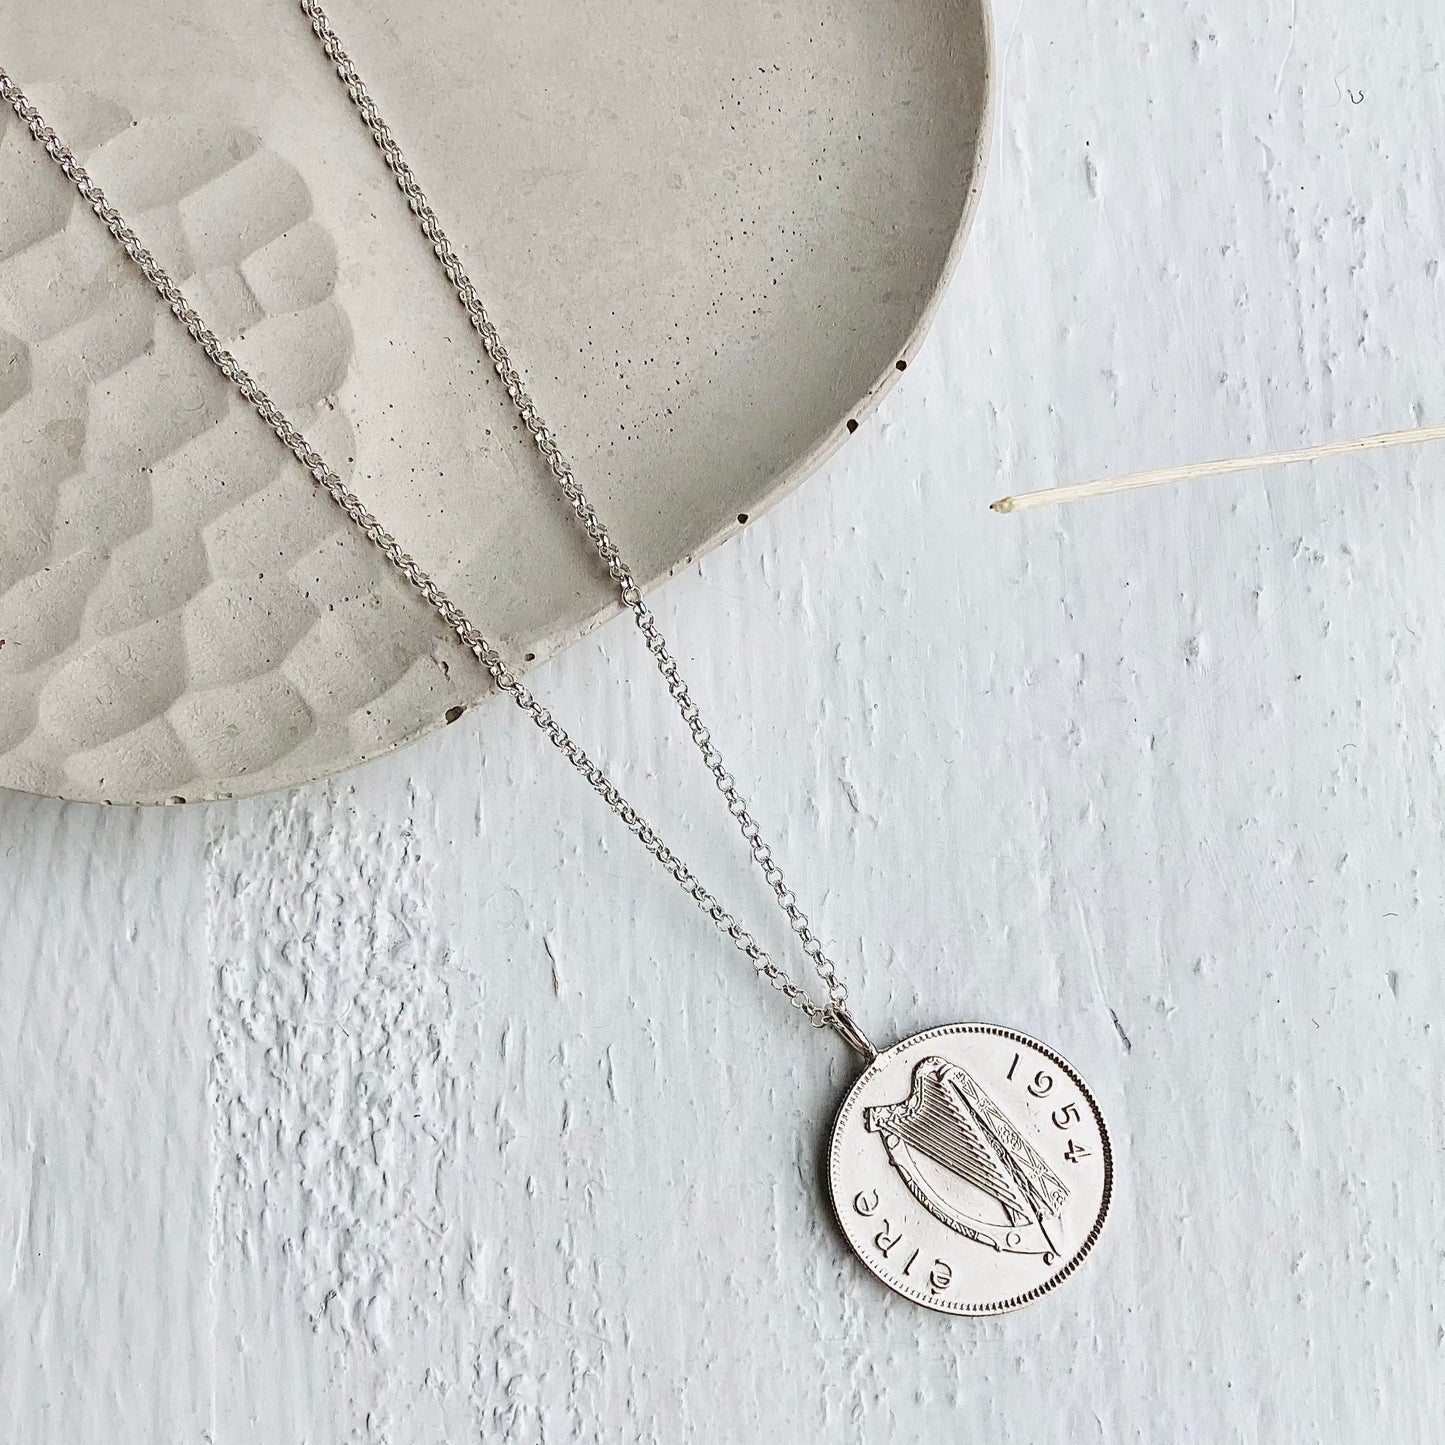 1954 Irish shilling Silver Coin Necklace with the Celtic Harp. Sterling silver chain real coin pendant to celebrate a 70th birthday for men or women